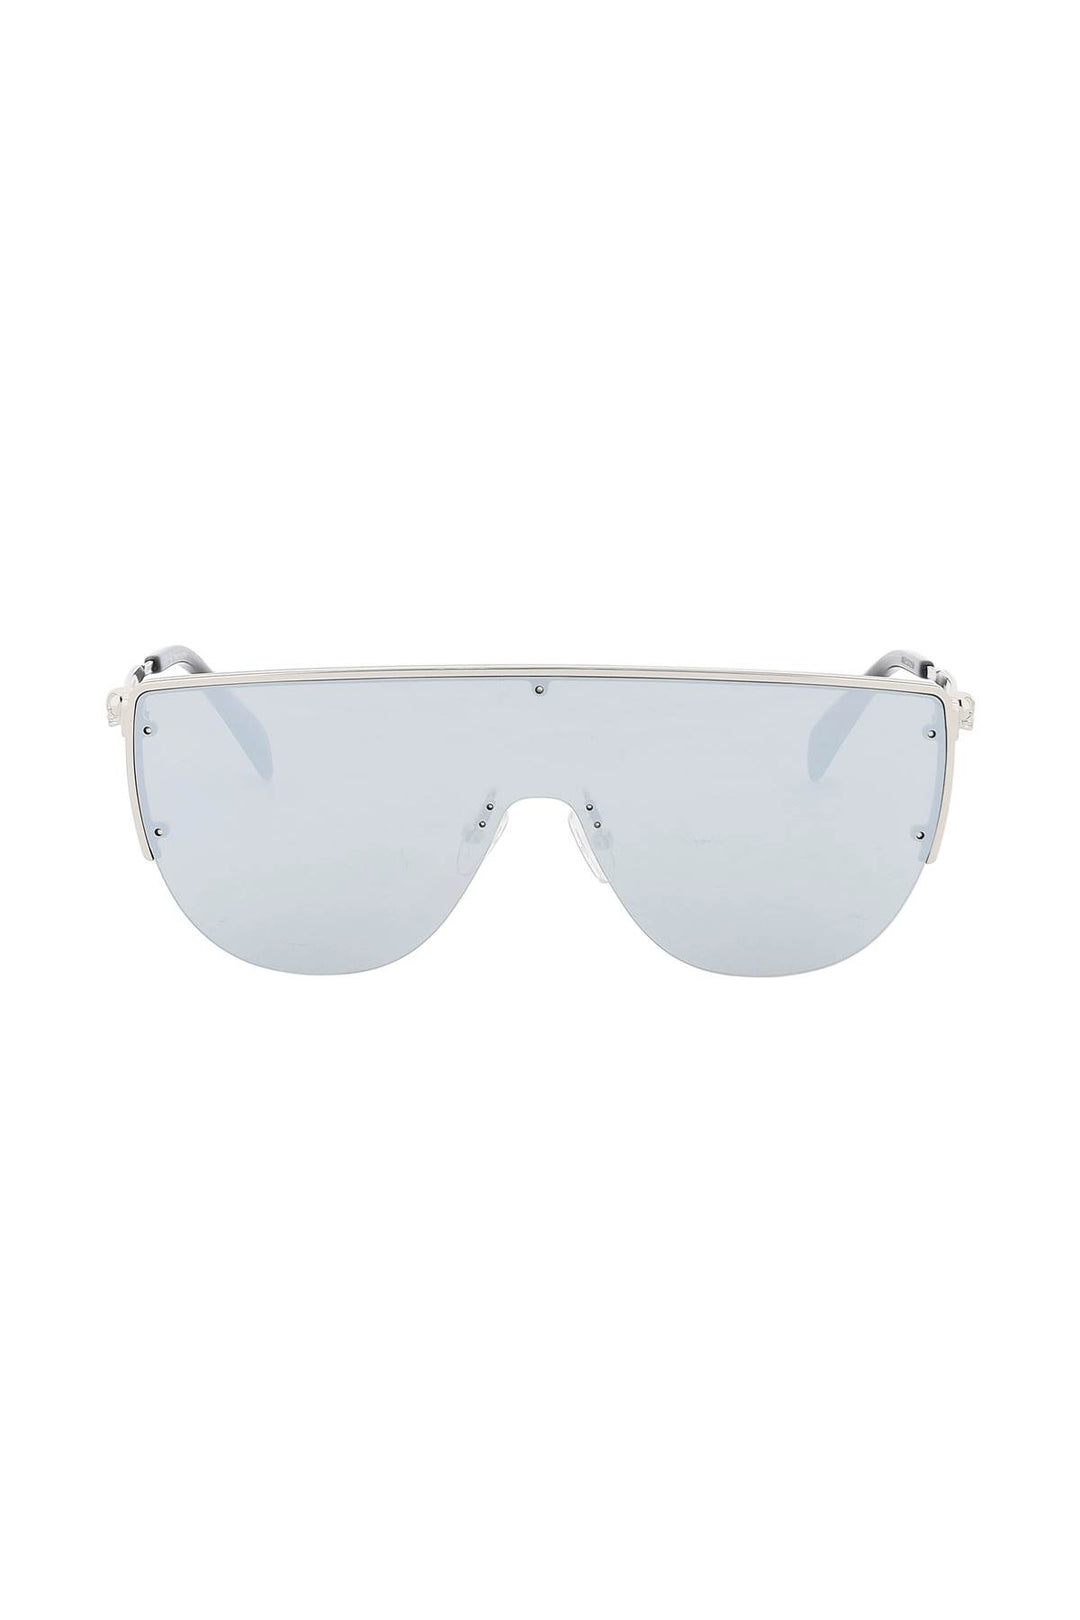 Alexander mcqueen sunglasses with mirrored lenses and mask-style frame-0